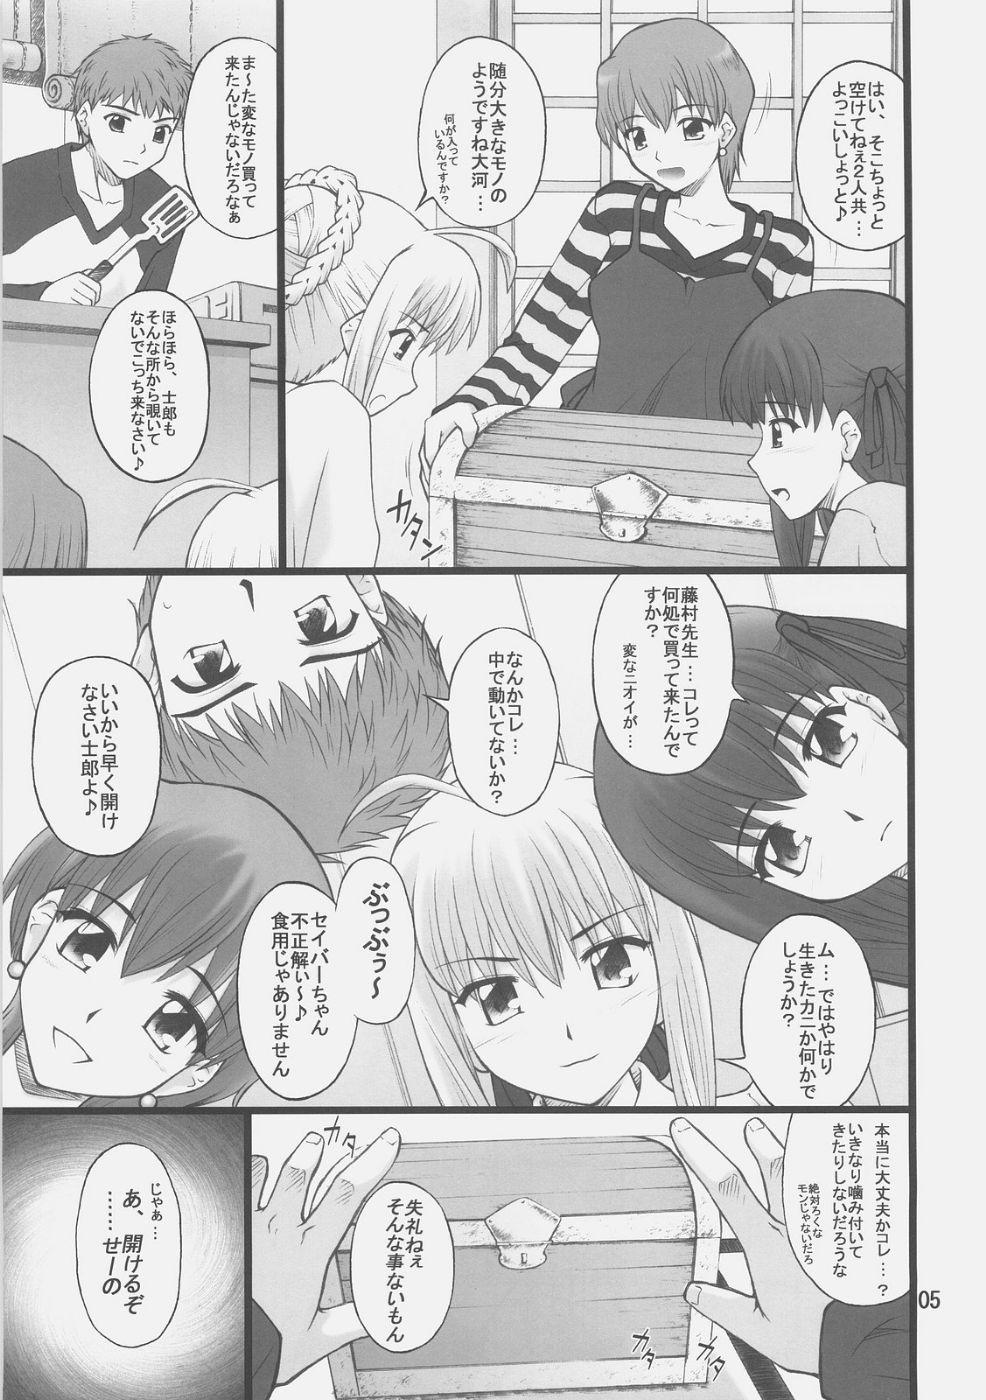 Russia Grem-Rin 1 - Fate stay night Cum Swallow - Page 4